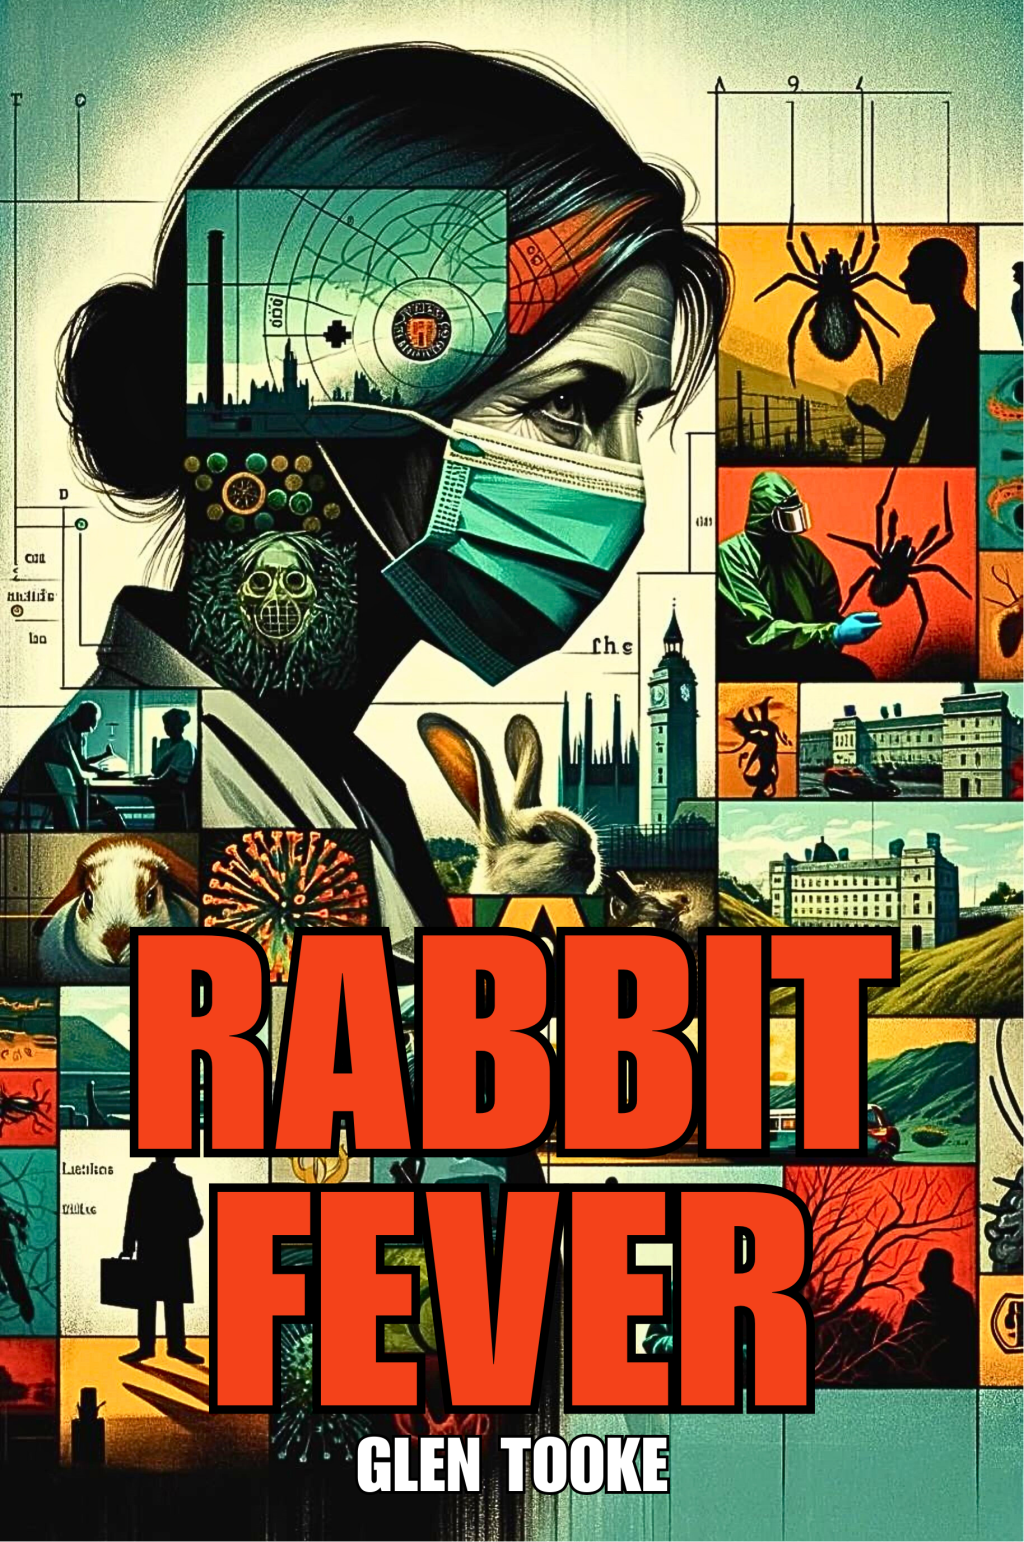 What does Rabbit Fever mean?